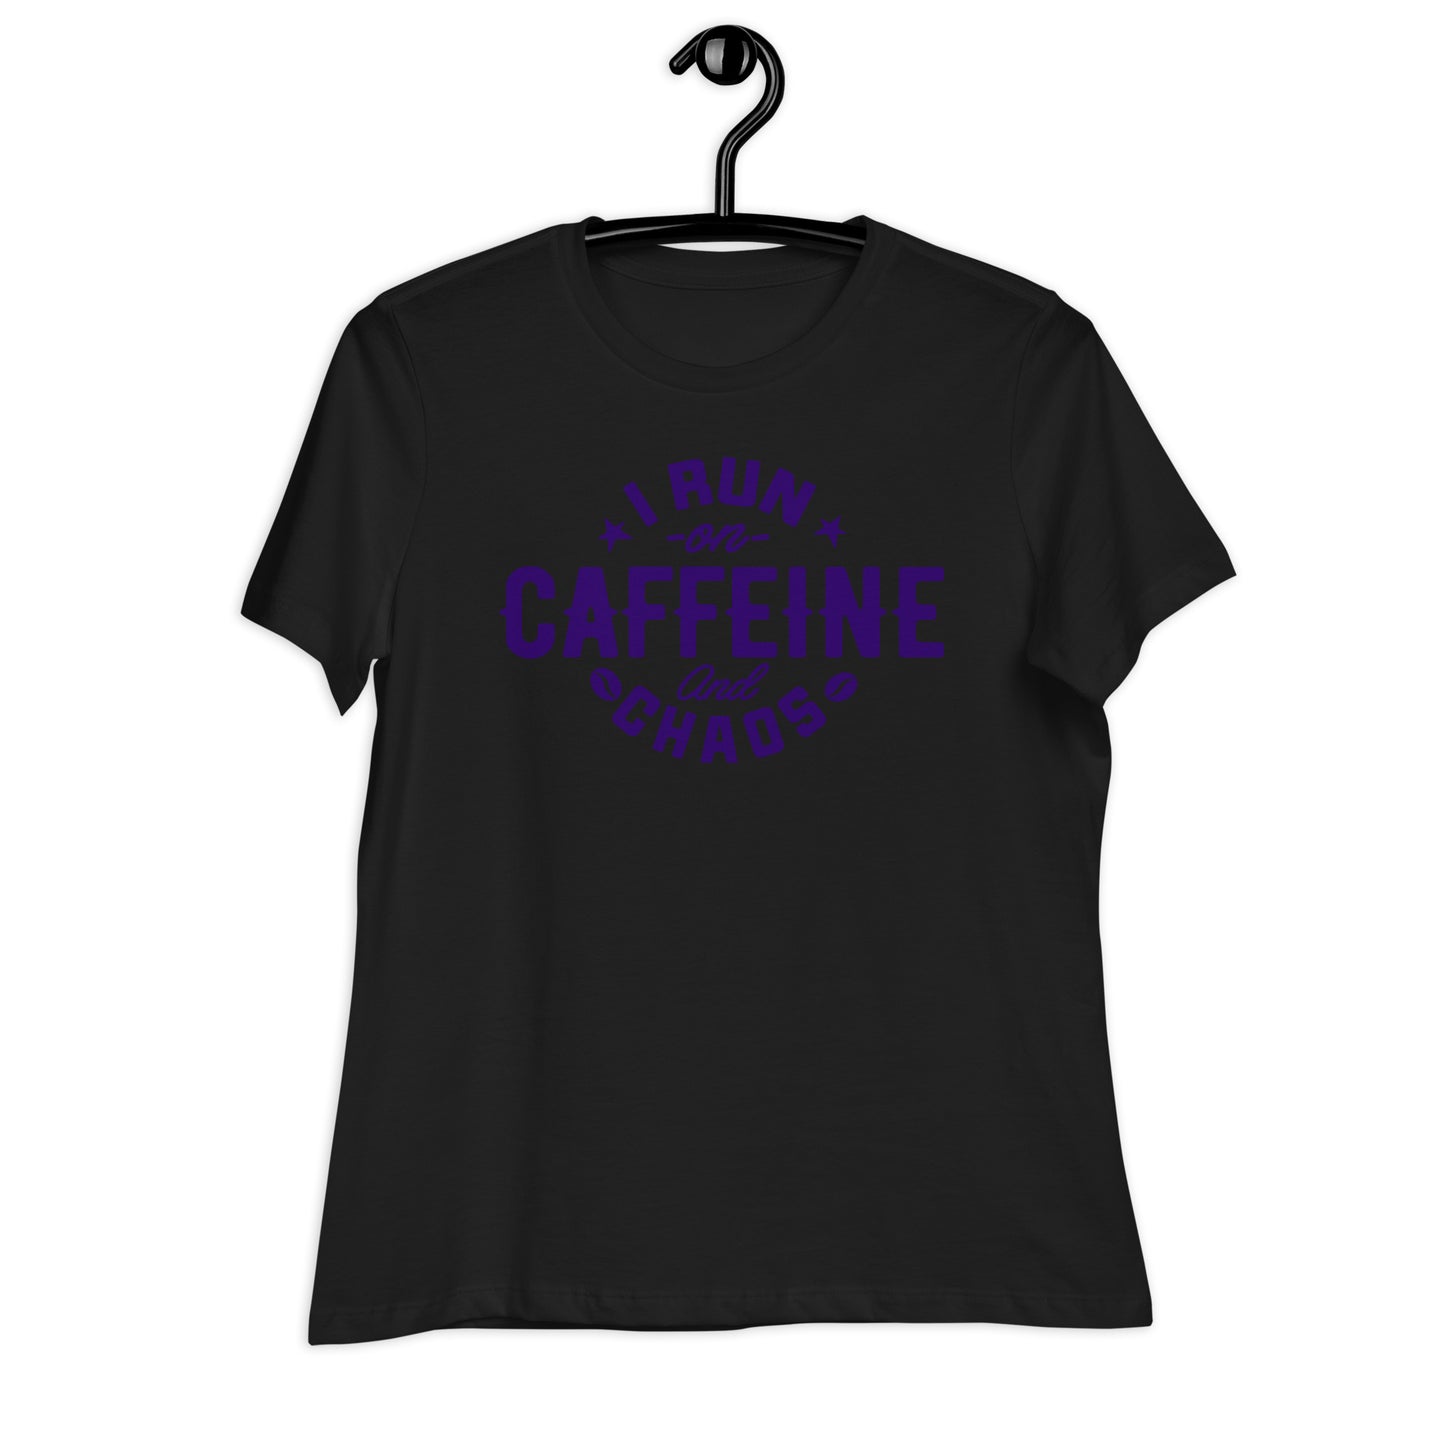 I Run on Caffeine and Chaos Bella Canvas Relaxed Women's T-Shirt